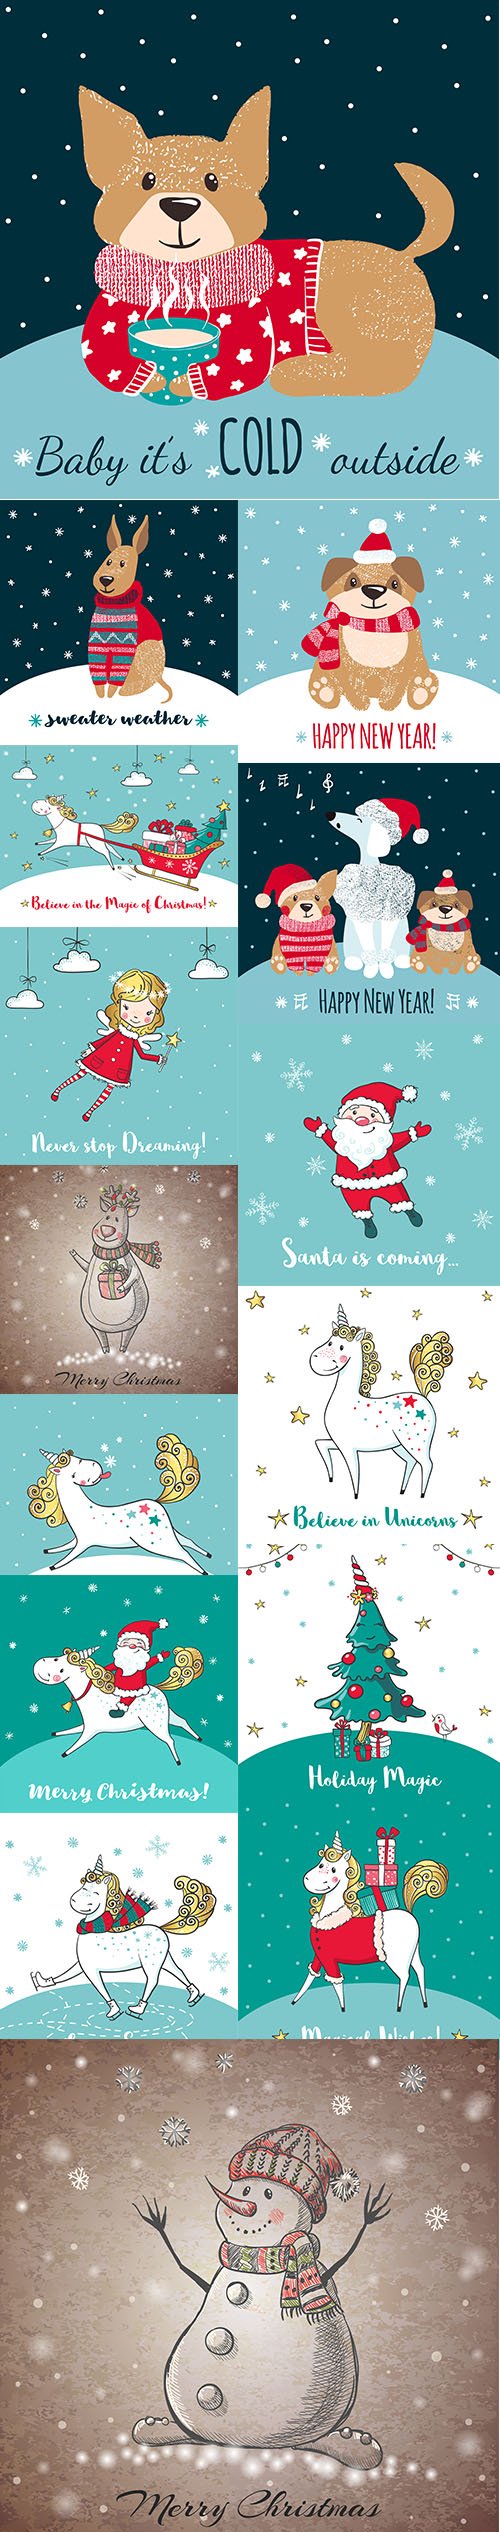 Christmas Greeting Card with Cute Personage Set